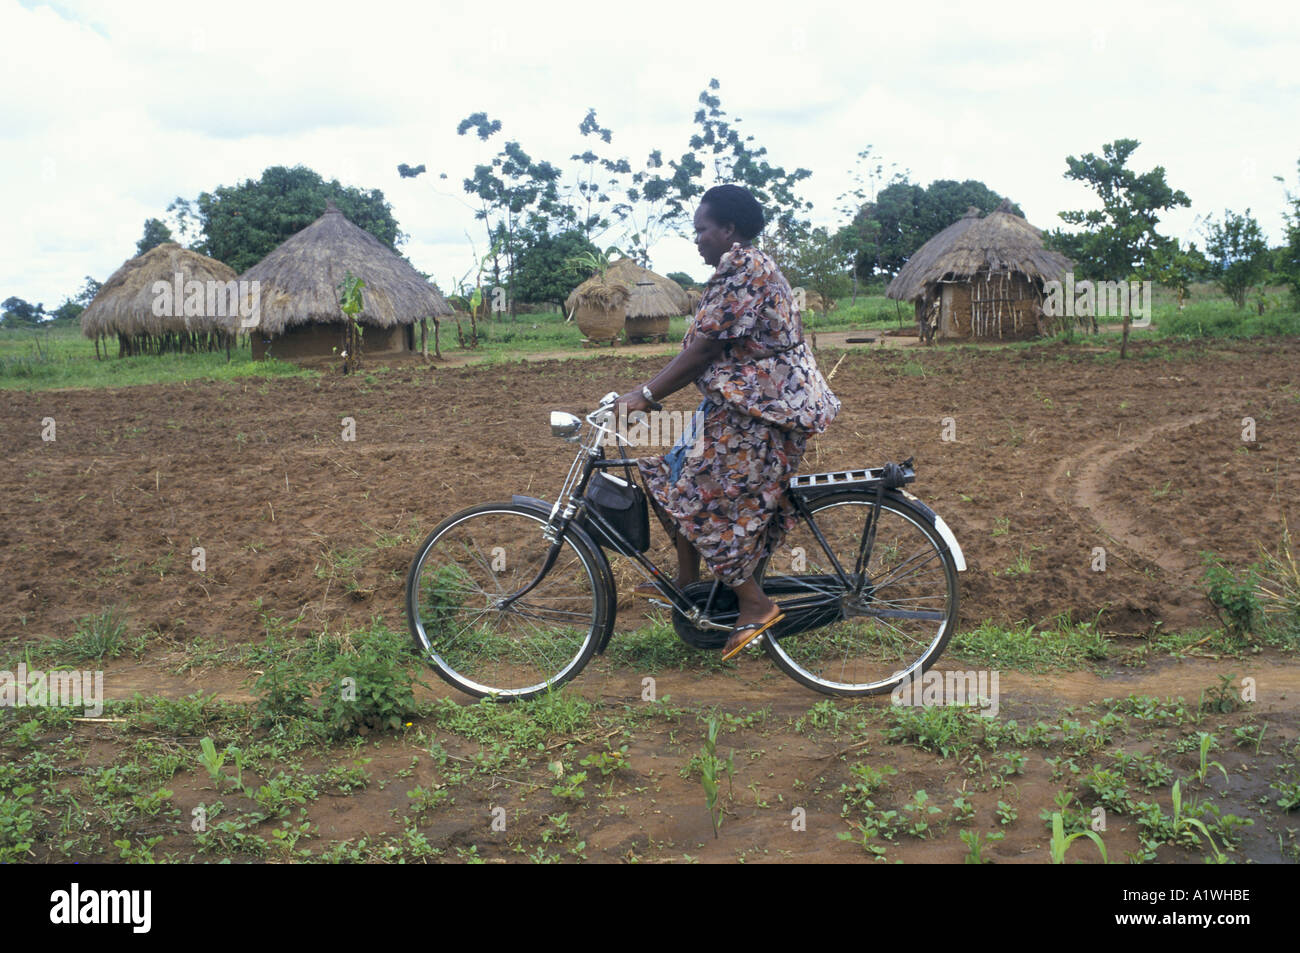 AN AIDS COUNSELLOR ON A BICYCLE VISITING A SUFFERER IN THE LOCAL COMMUNITY UGANDA 1997 Stock Photo